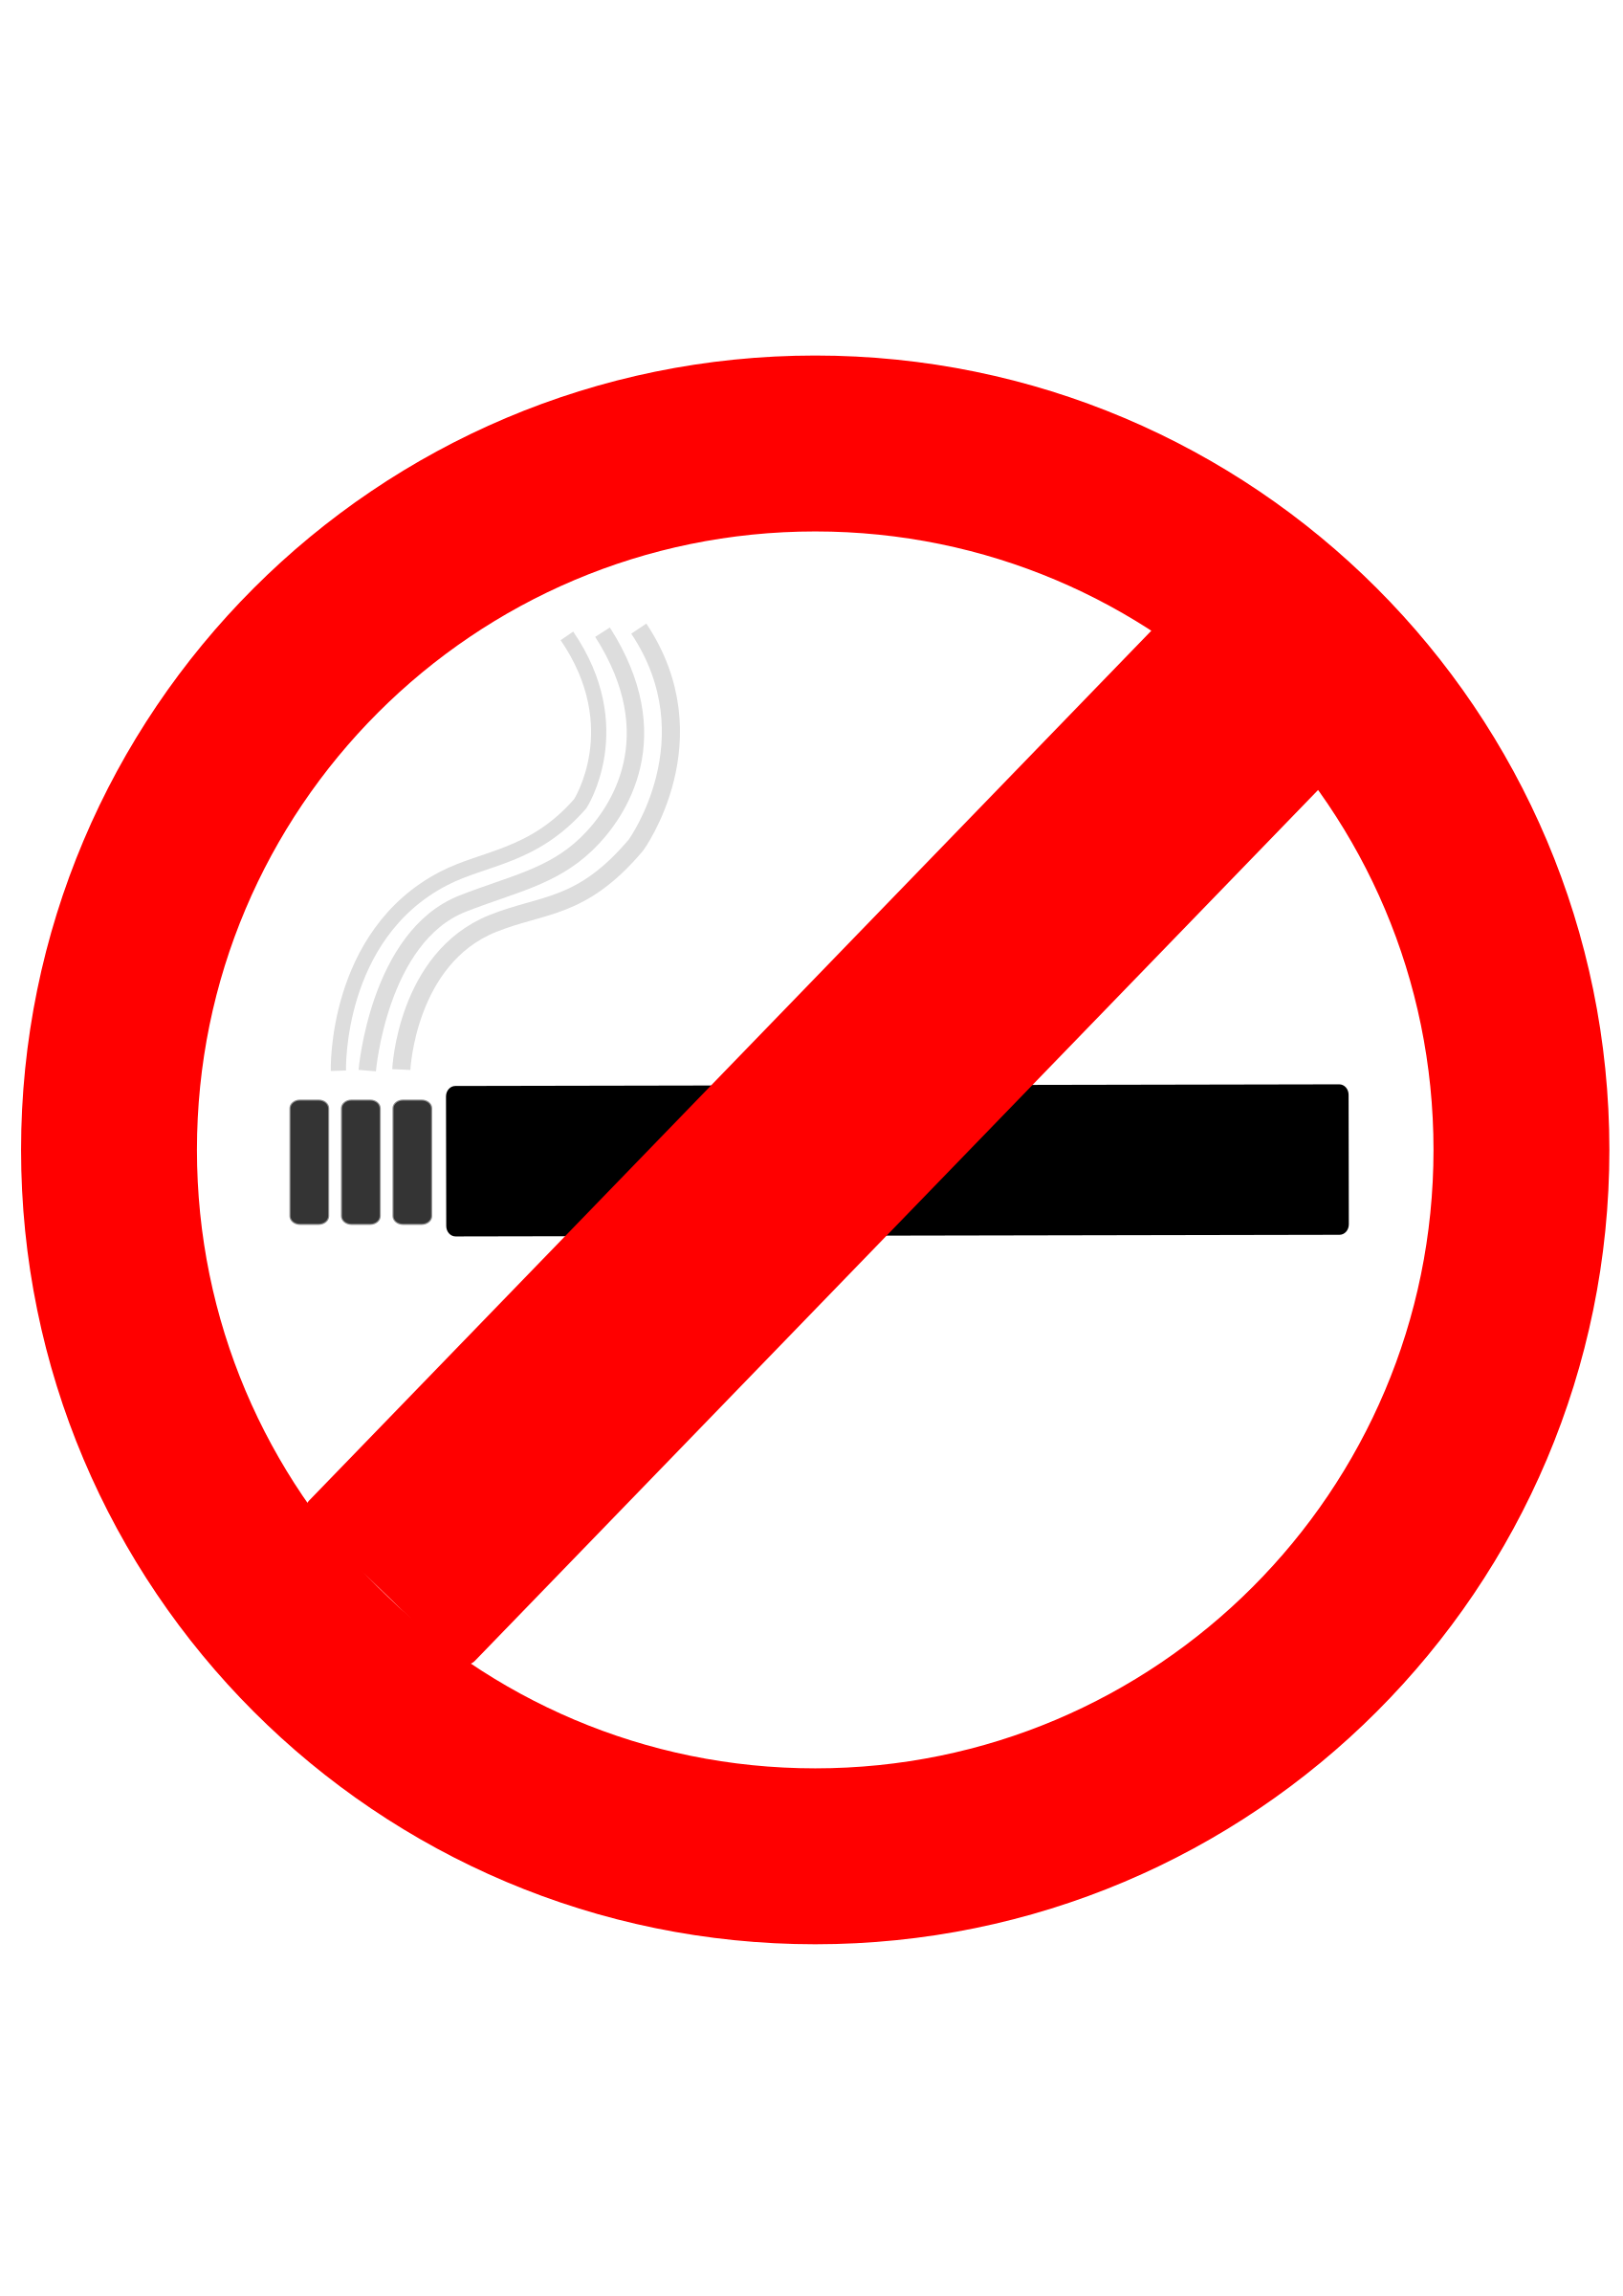 Download PNG image - World No Tobacco Day PNG Transparent Picture 